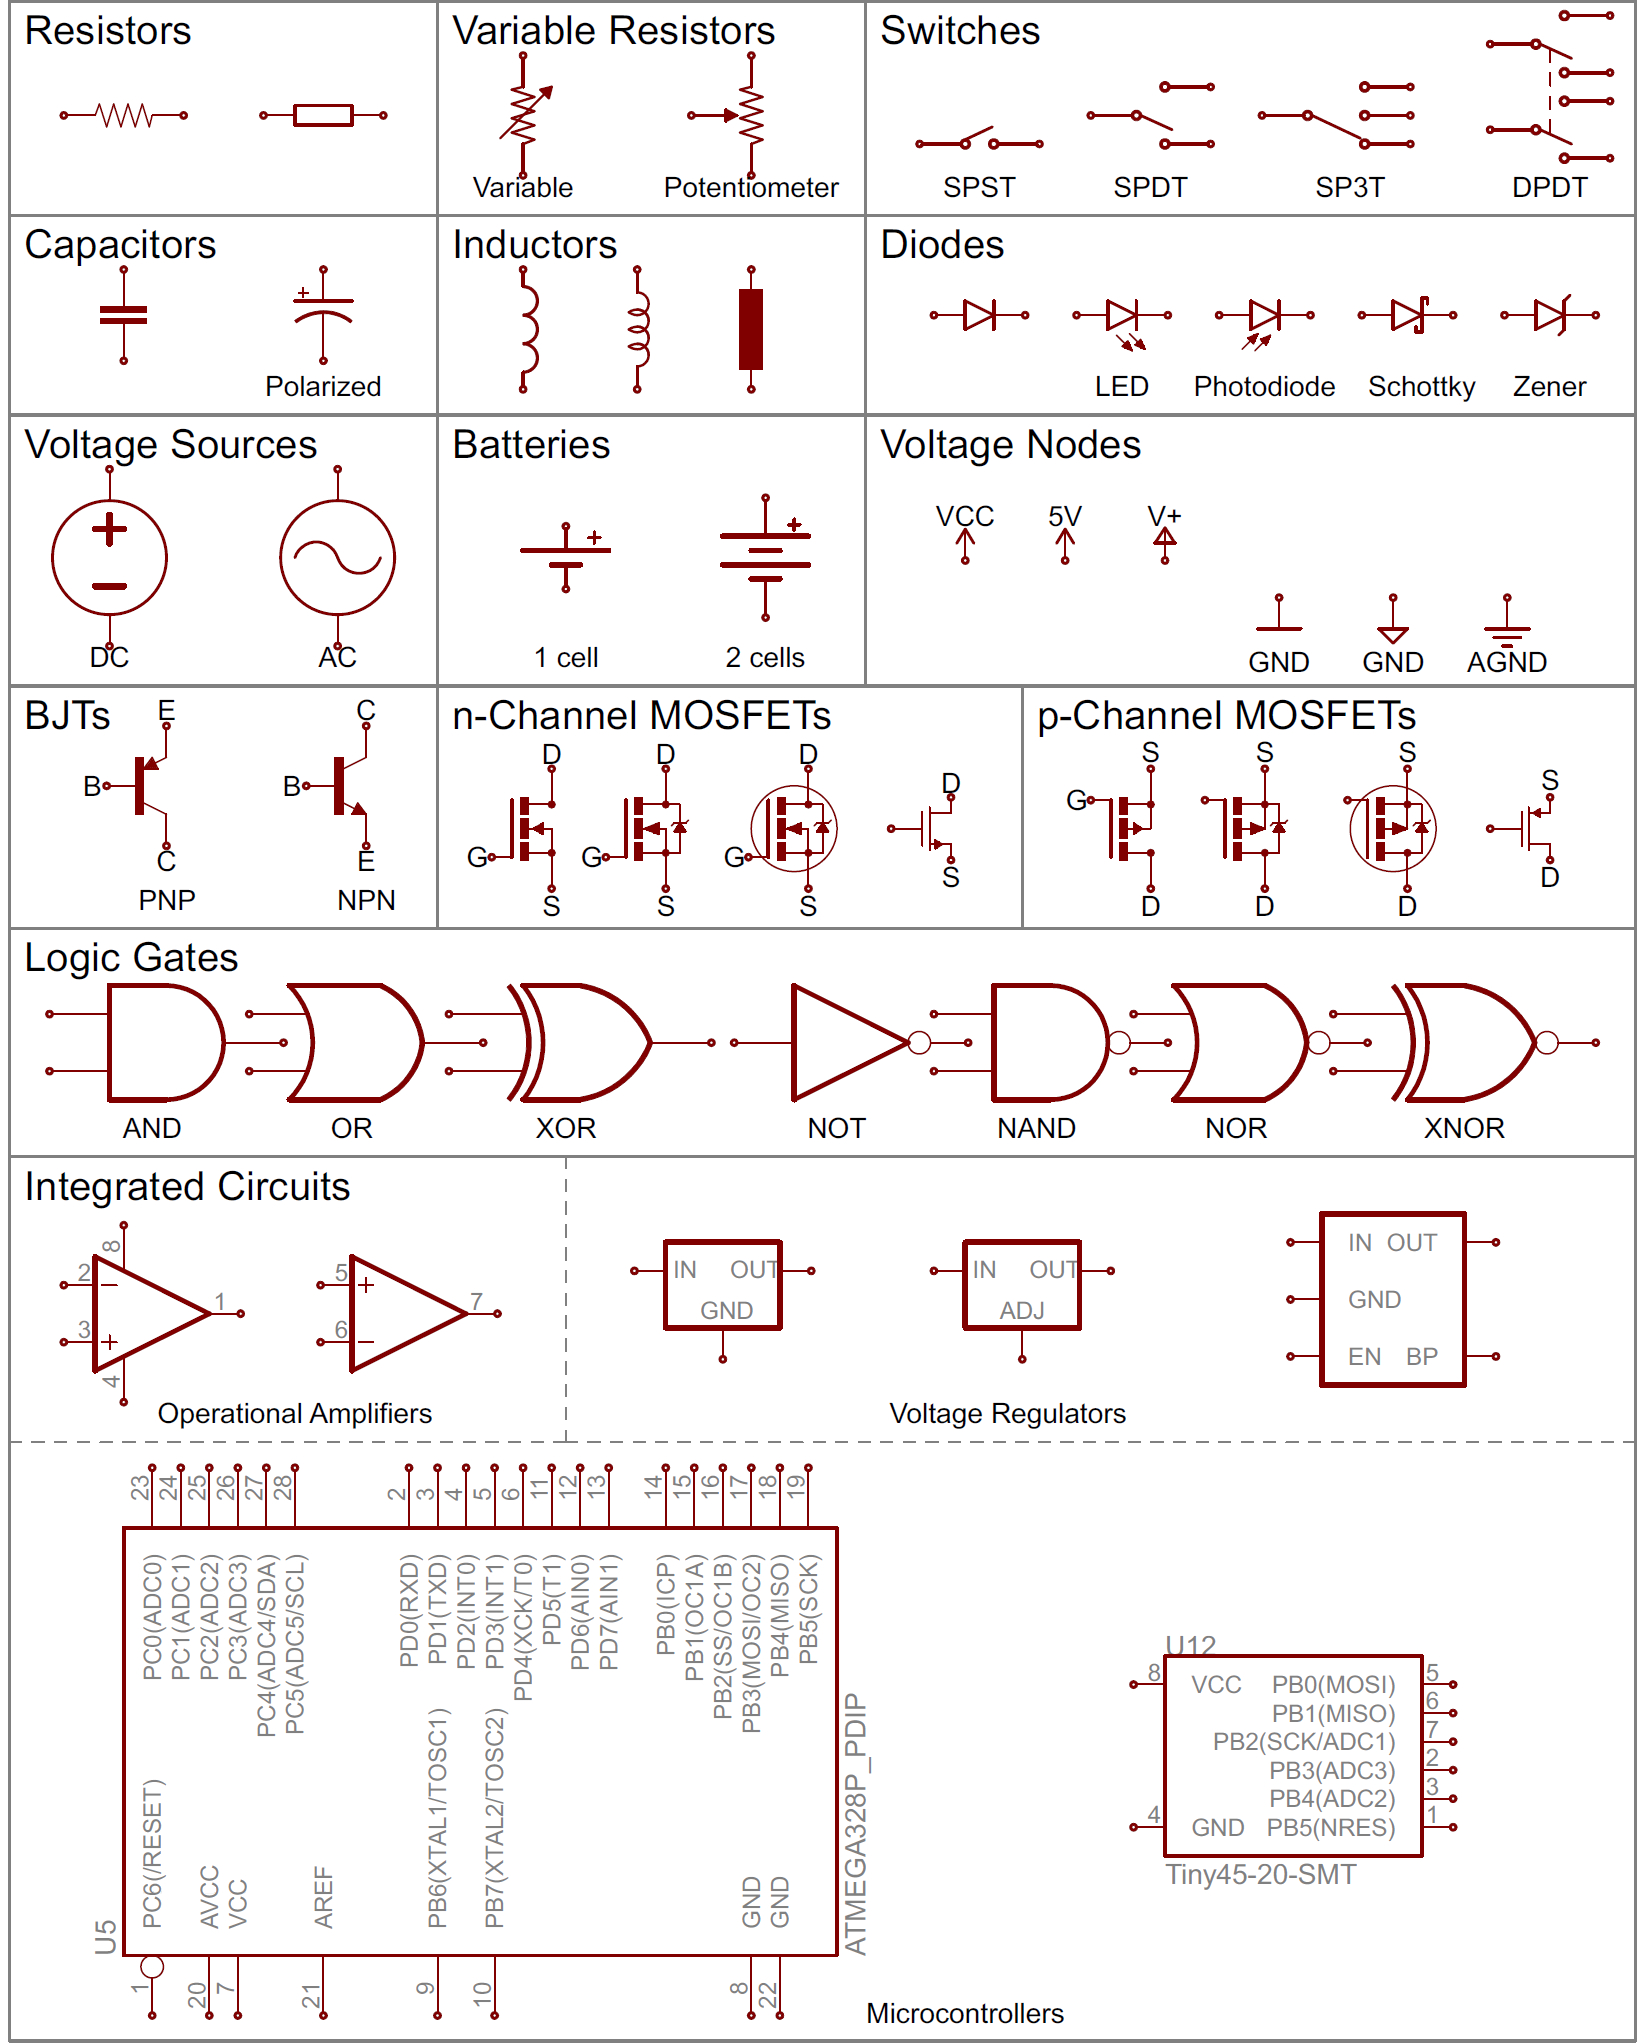 How To Read A Schematic - Learn.sparkfun - Wiring Diagram Symbols